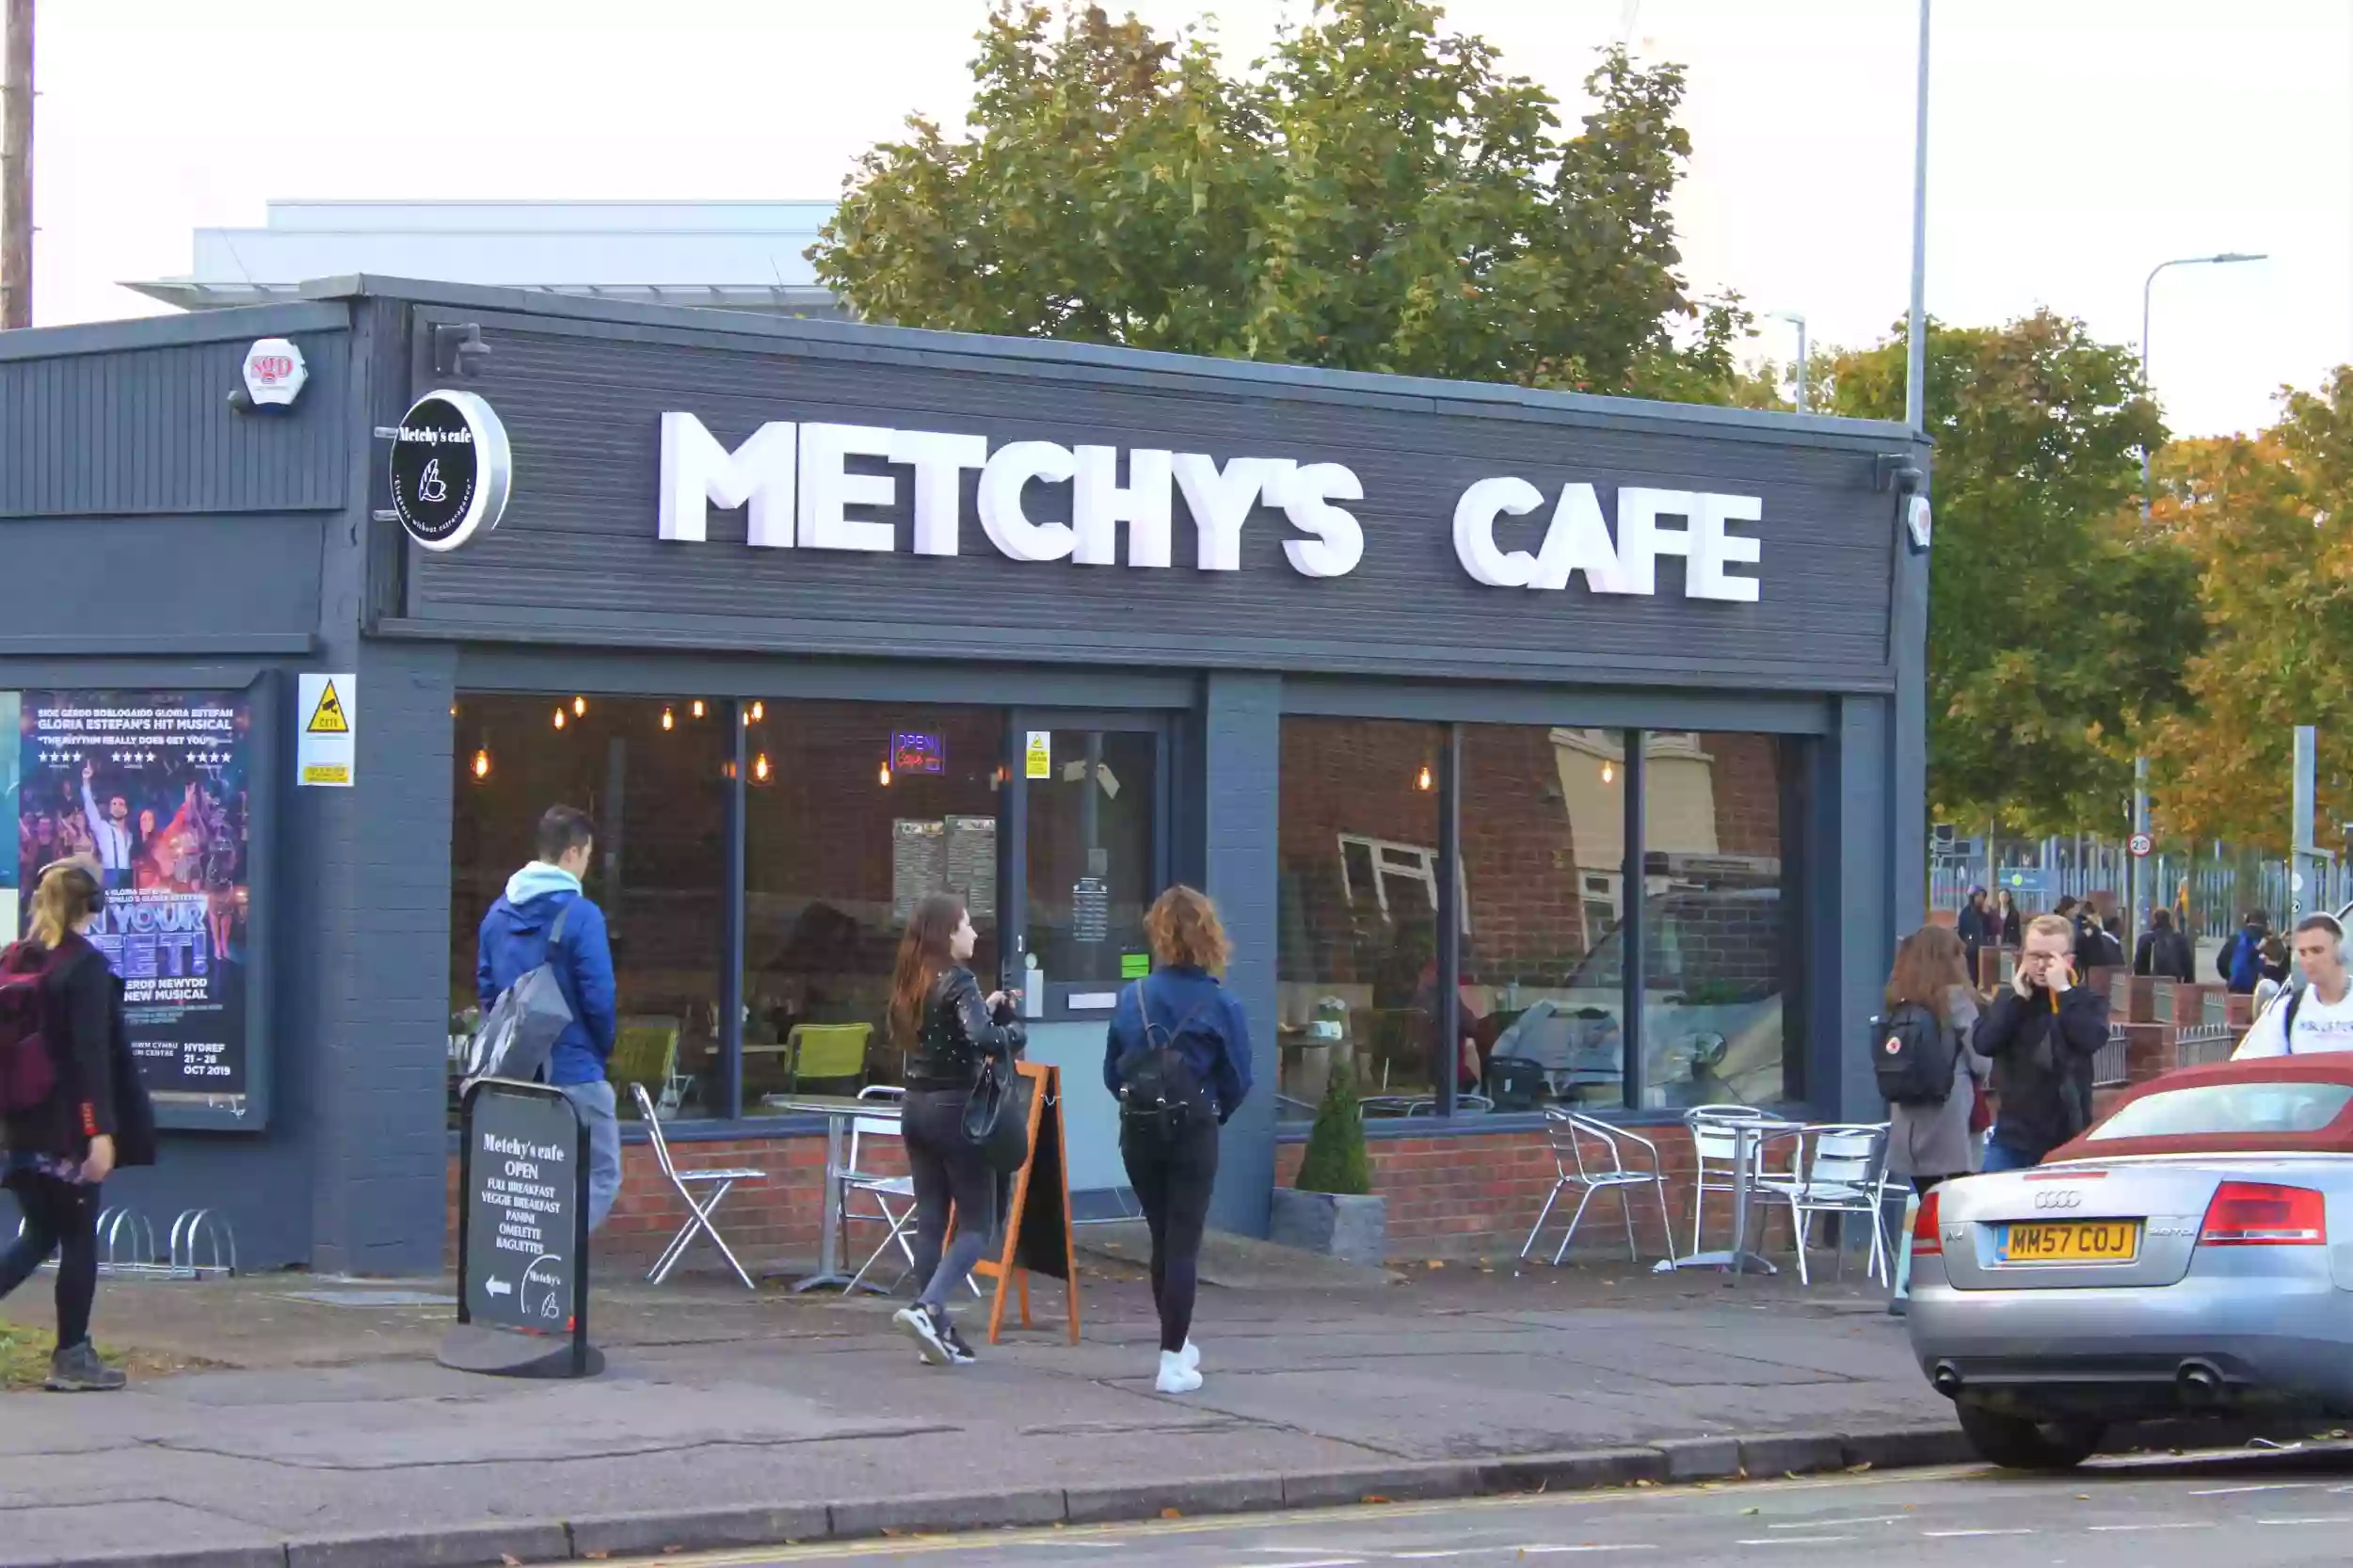 Metchy's Cafe & Bar